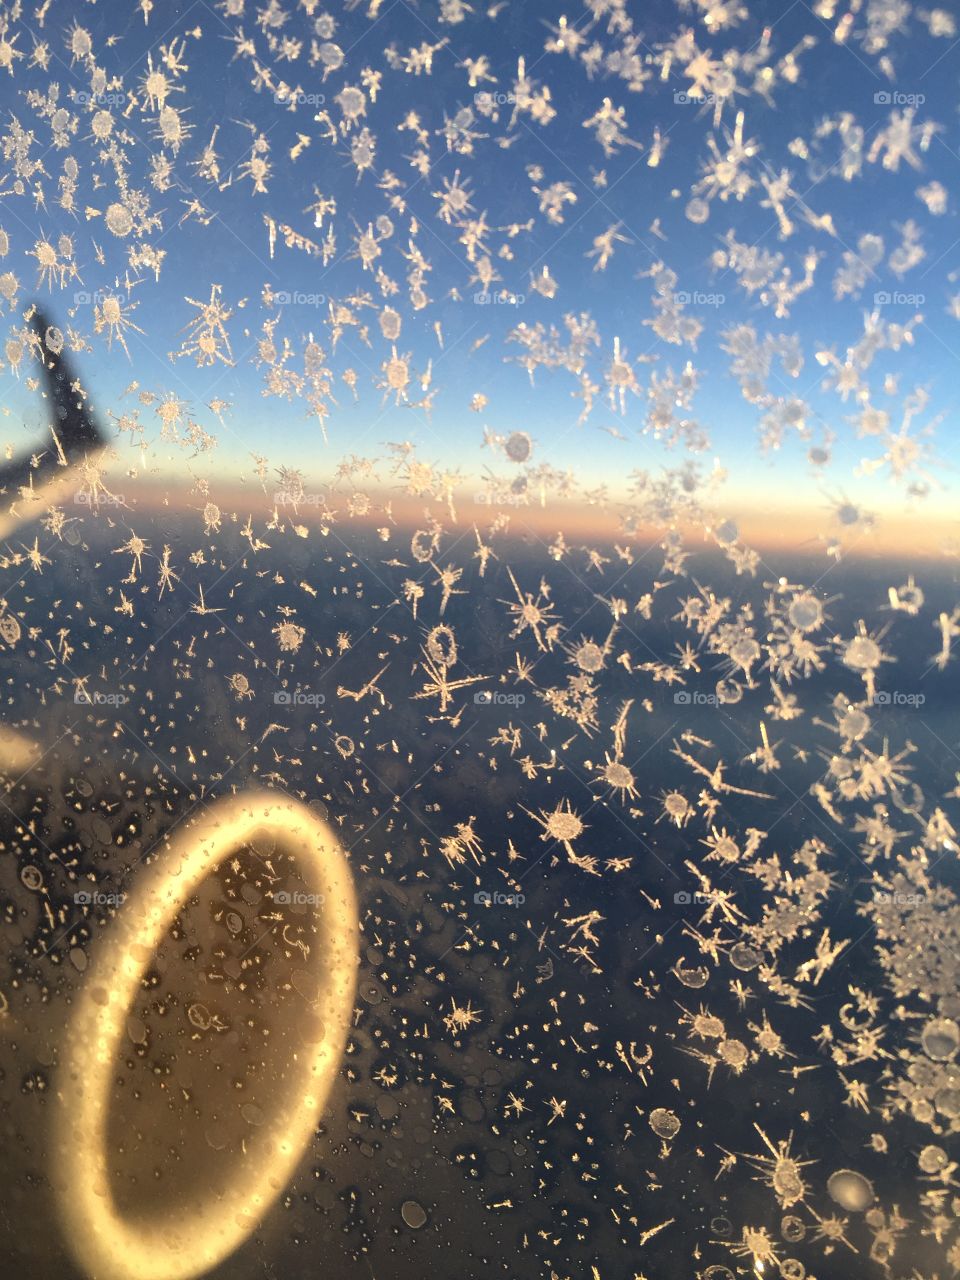 View outside an airplane window at sunset